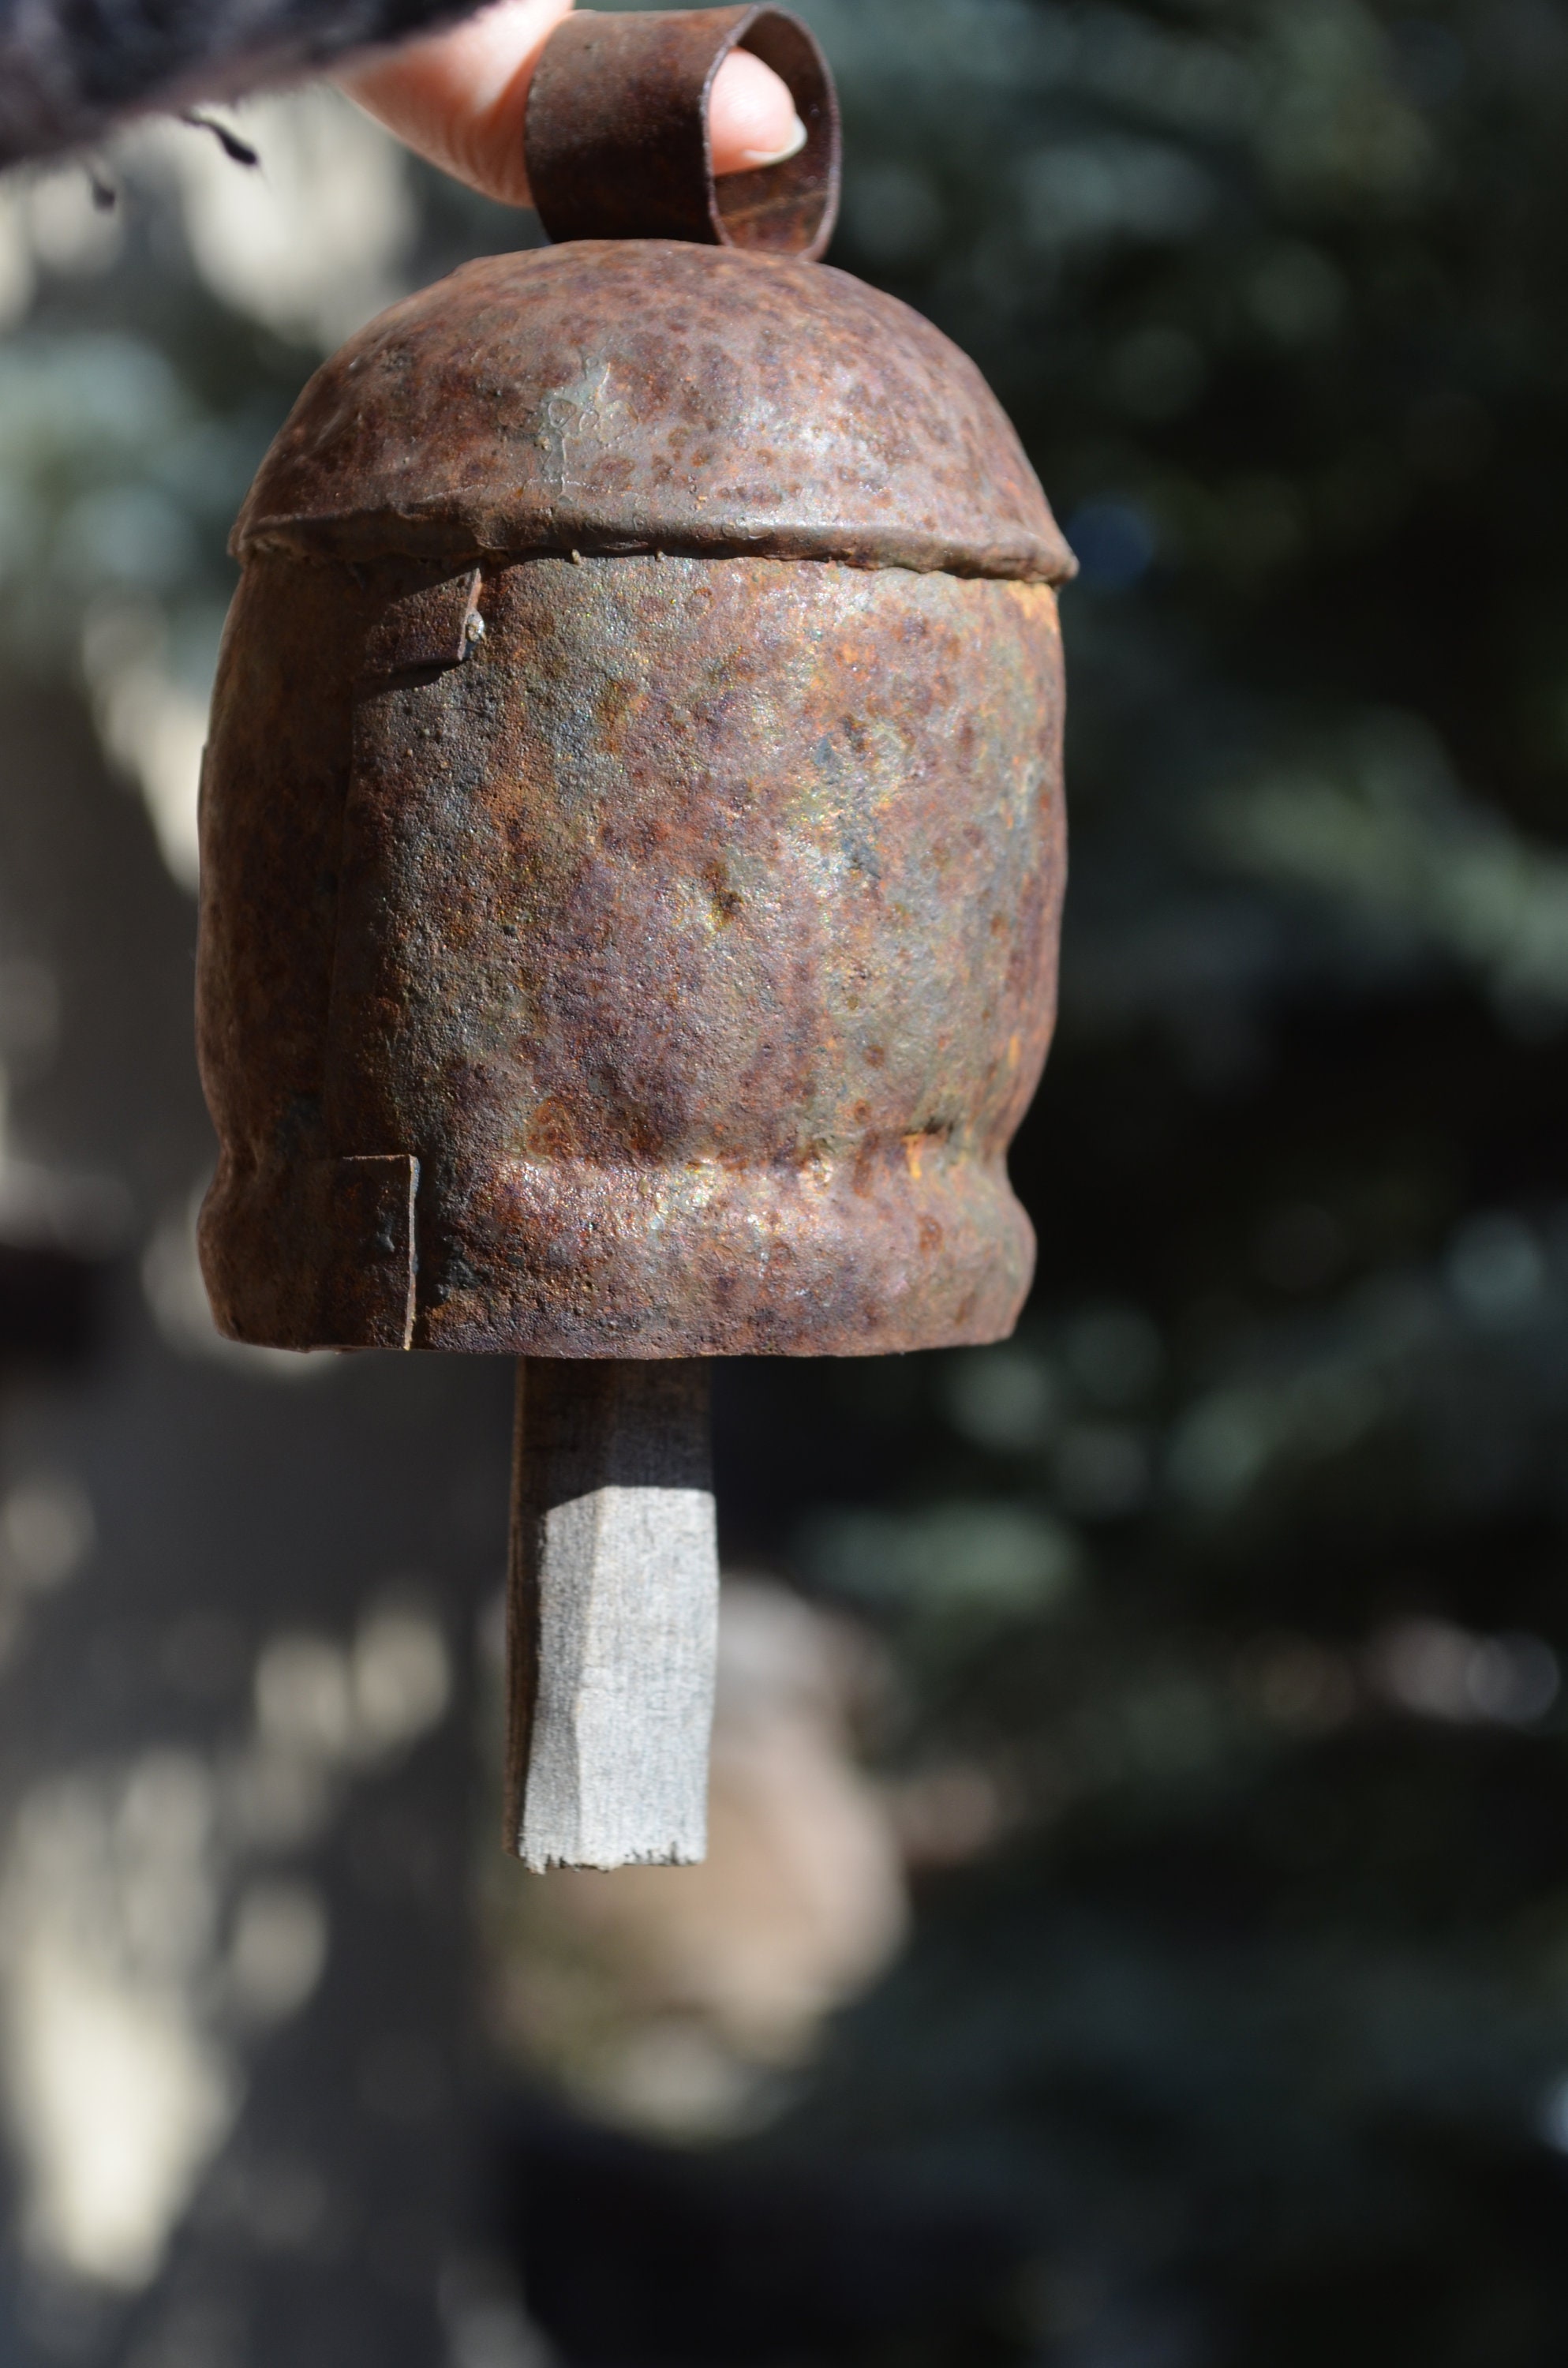 Hanging Cow Bell Antique Cow Bell with Handle and Original Wood Clapper Rust and Metal Rustic and Primitive Dovetailed Olympic Games